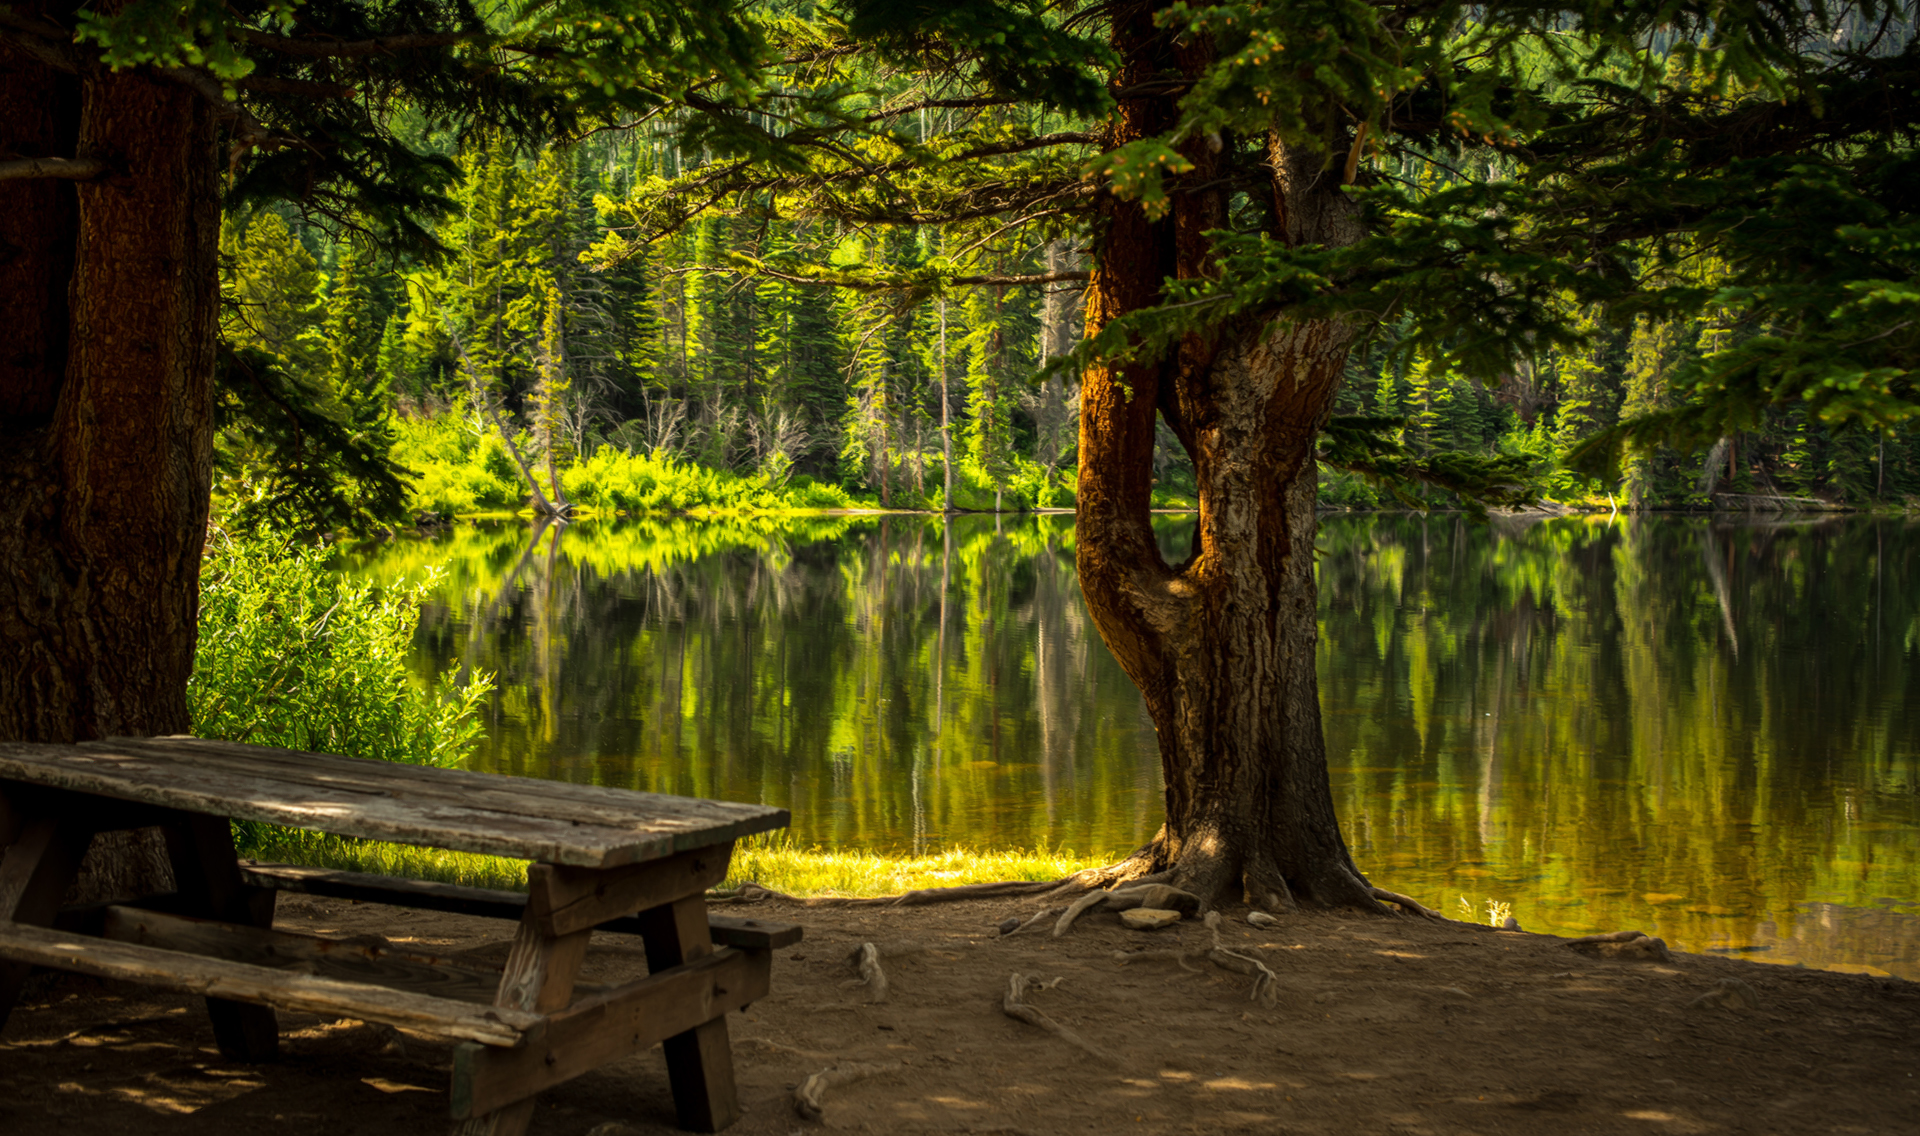 EXT. LAKESIDE BENCH – DAY